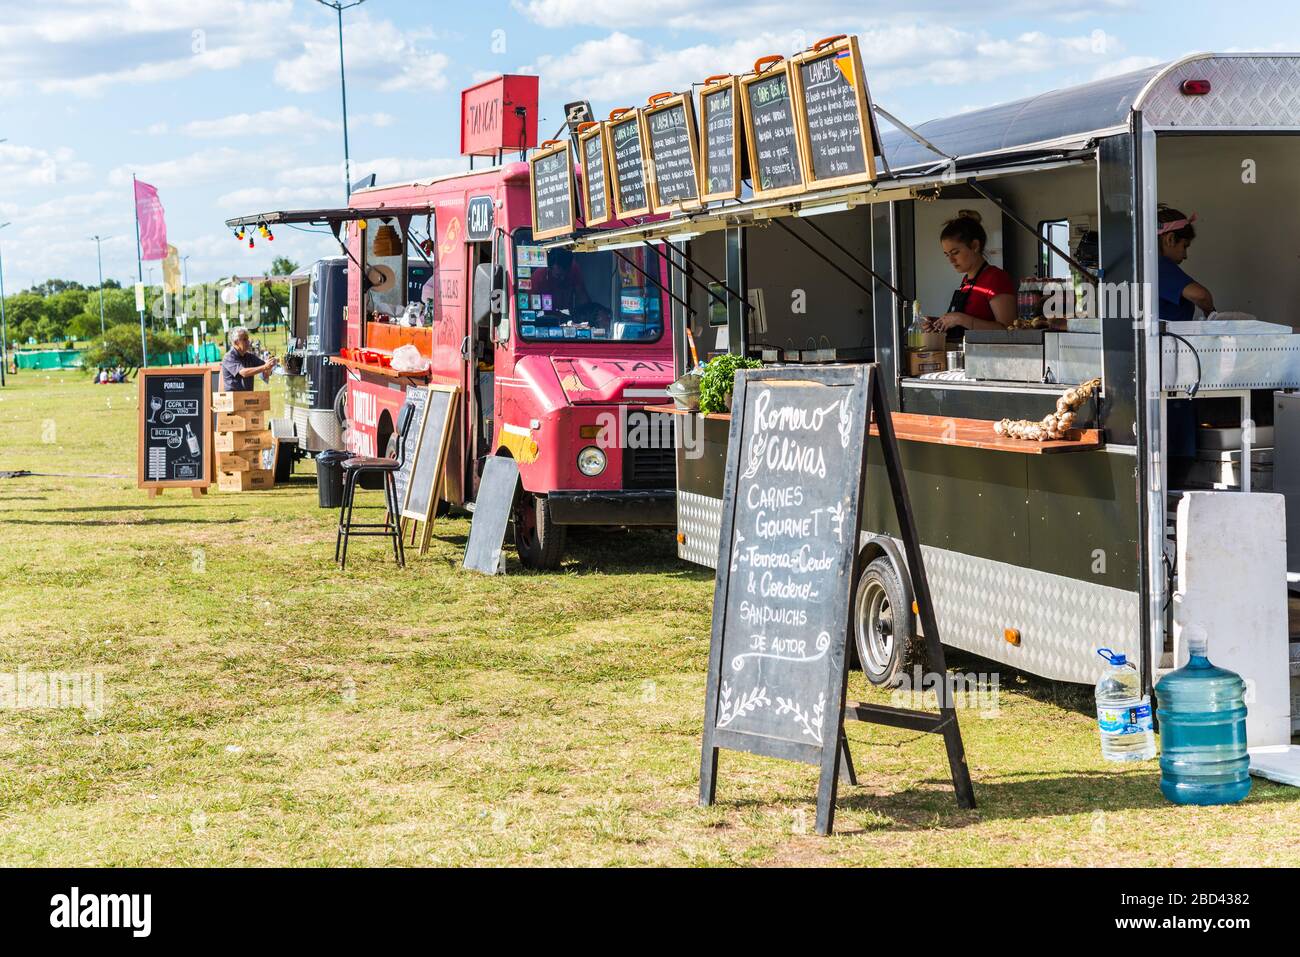 Vicente Lopez, Argentina - December 21, 2019: Food trucks and people Stock Photo